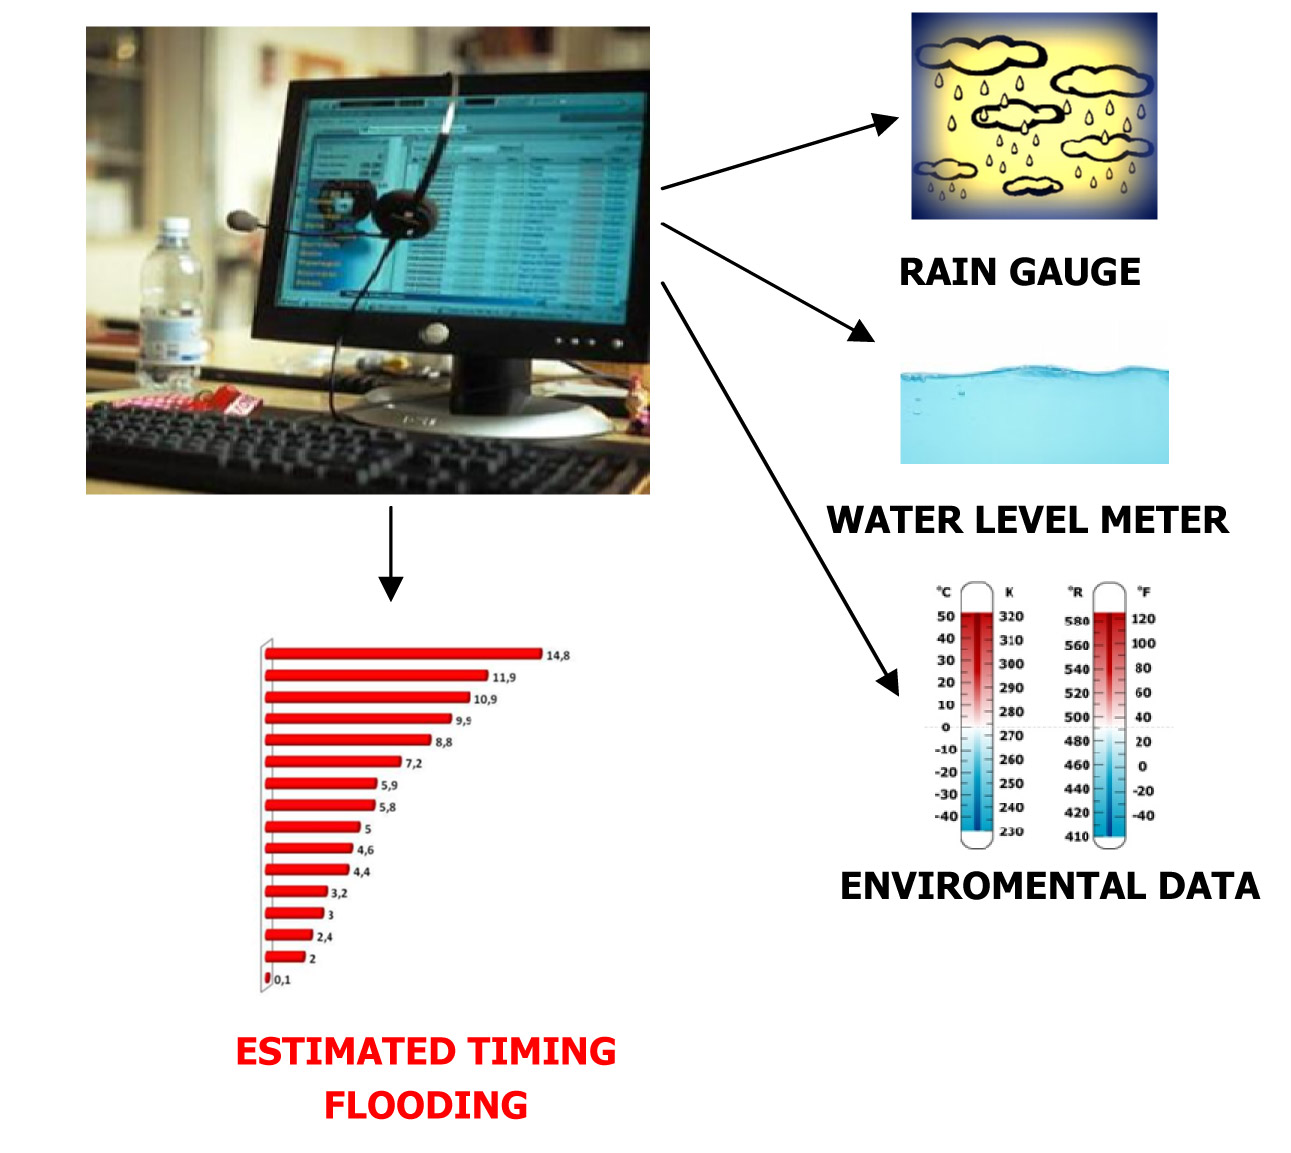 Flood Guardian: water levels and environmental data measuring